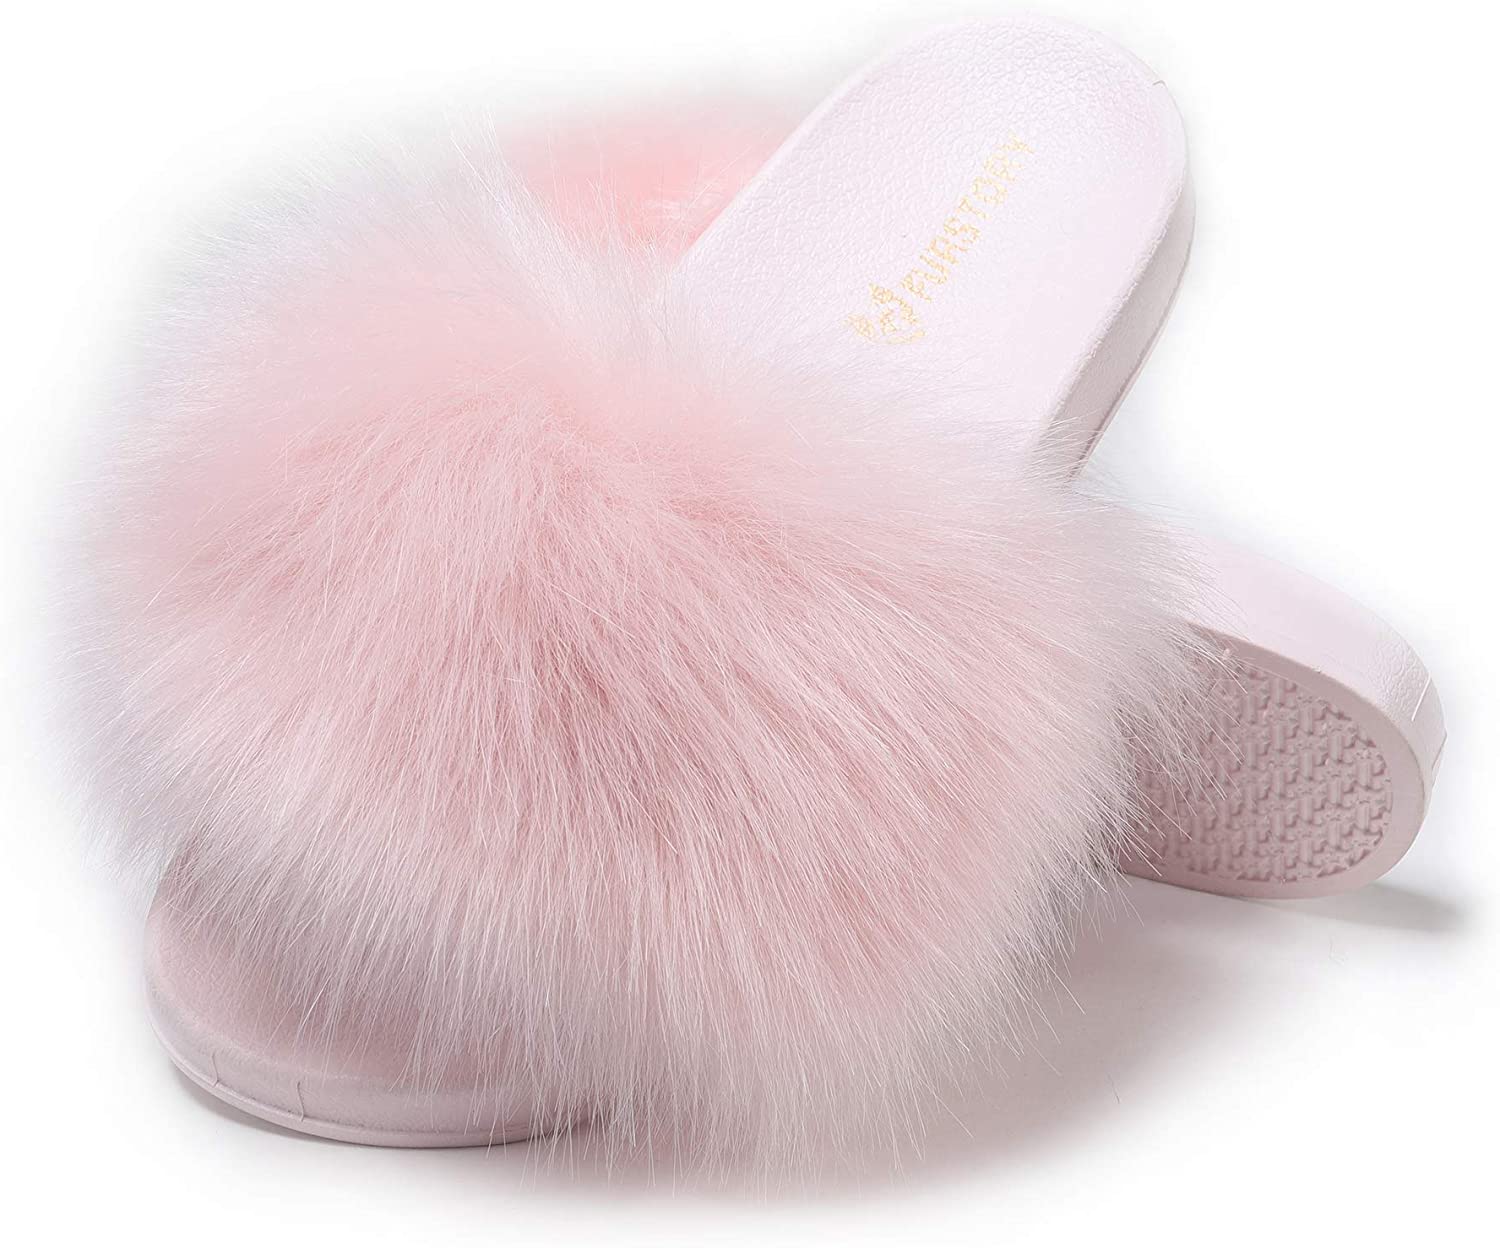  USYFAKGH Fur Slippers Slides Summer Shoes For Women Women's  Fashion Square Toe Pure Color Furry Comfortable Casual Flat Slippers Pink